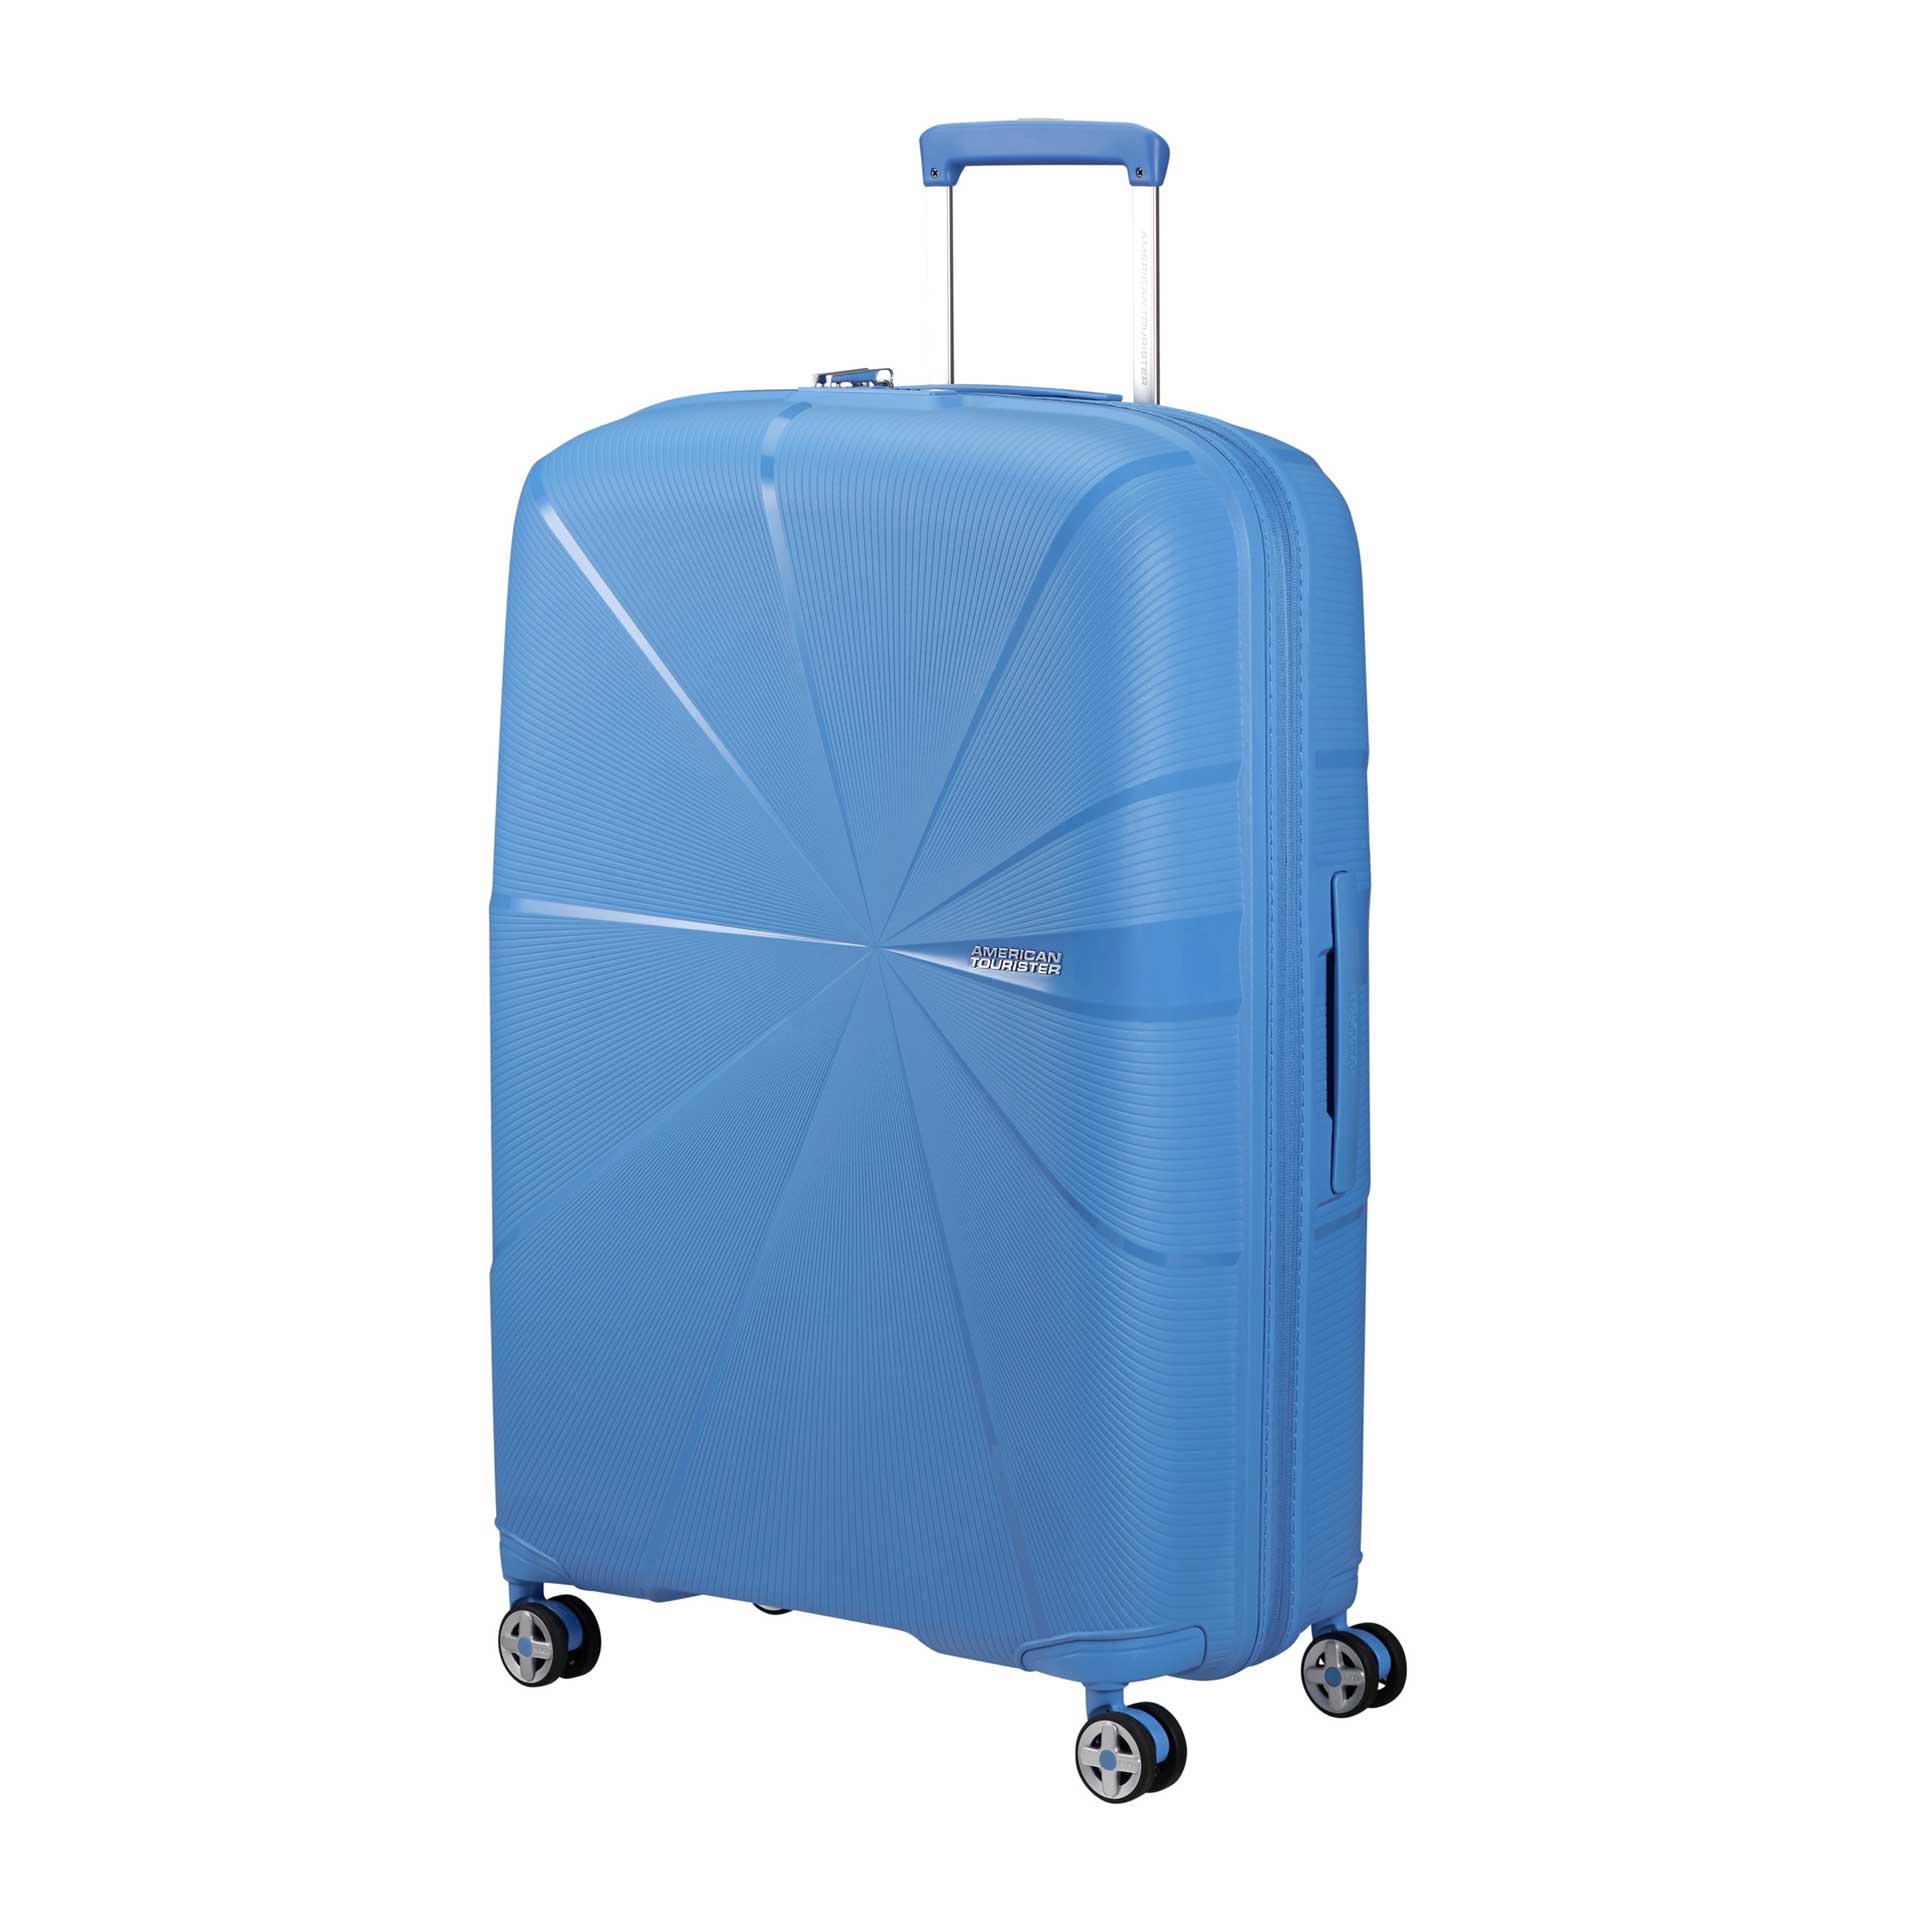 5400520202680_2_american-tourister_starvibe_american-tourister-starvibe-4rad-trolley-l-77-cm-erweiterbar-tranquil-blue_1920x1920